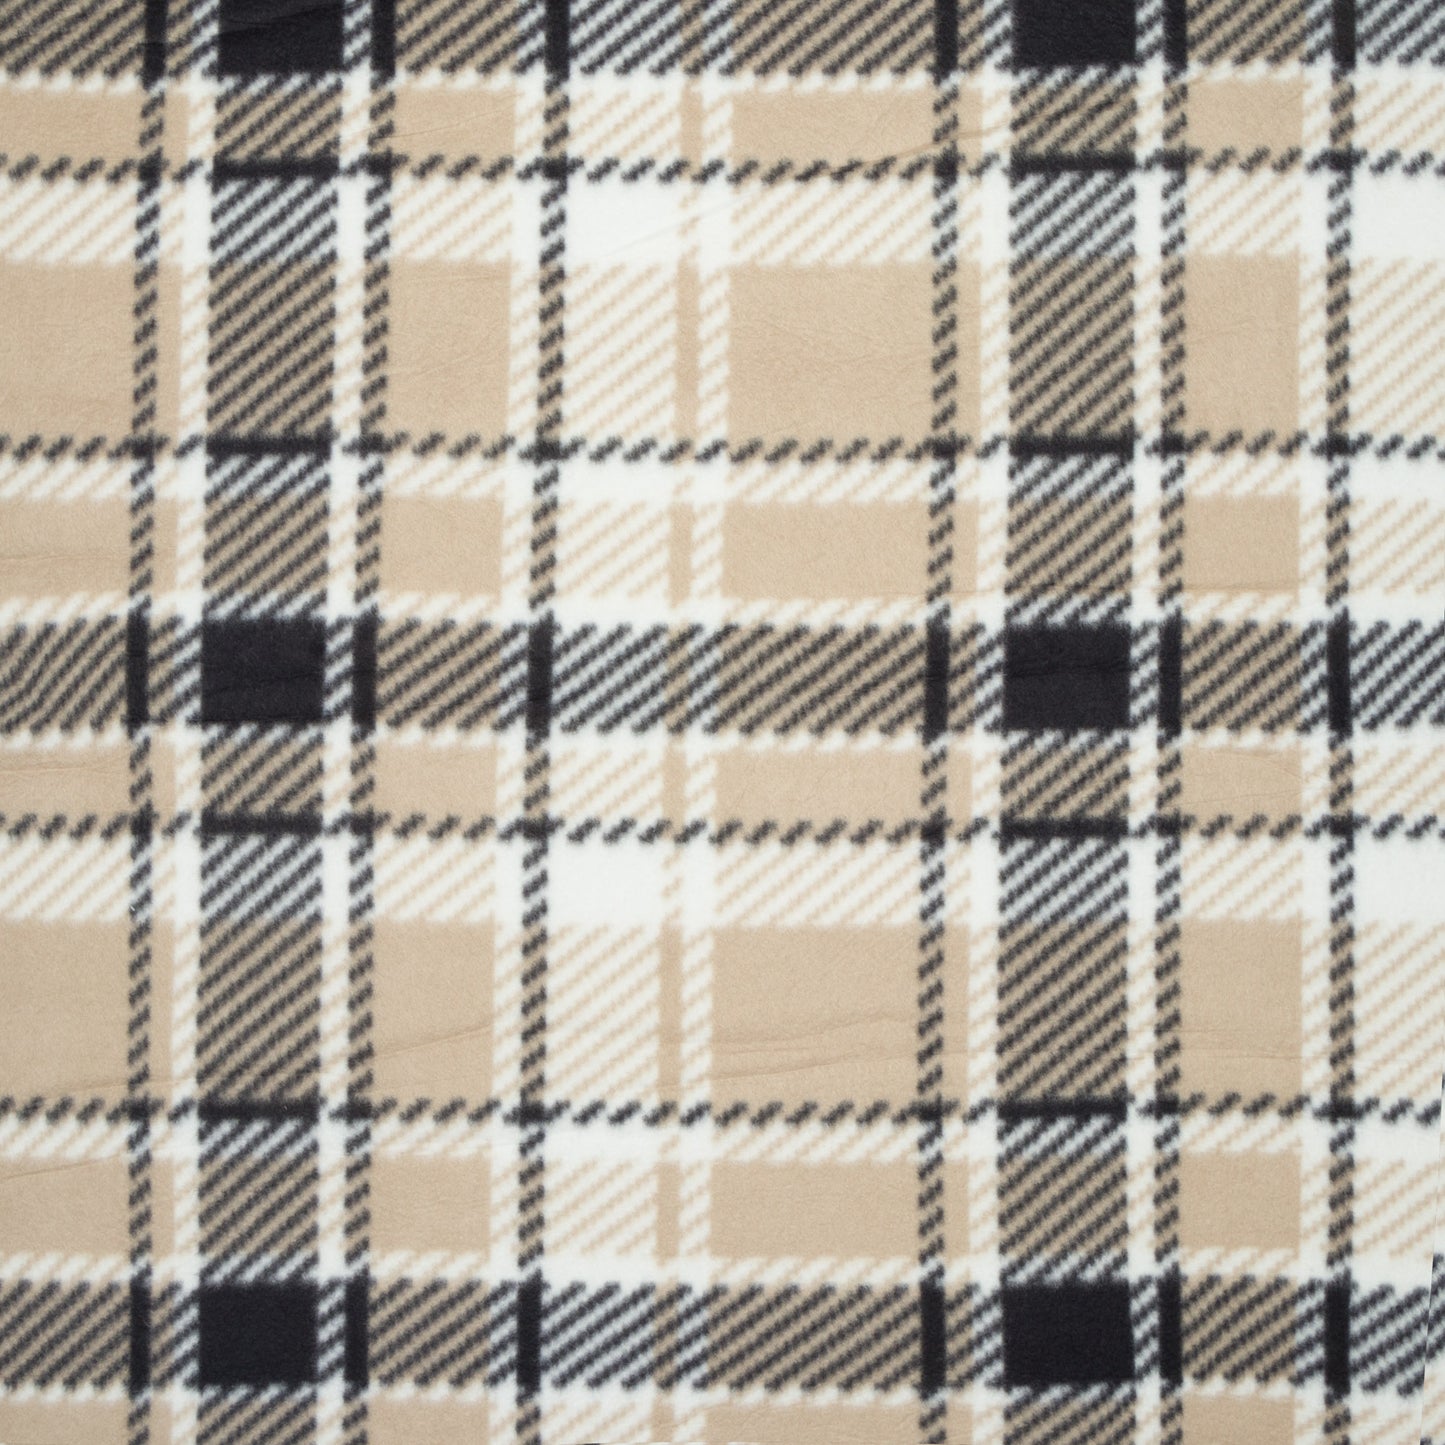 Printed Polar Fleece Check Biscuit